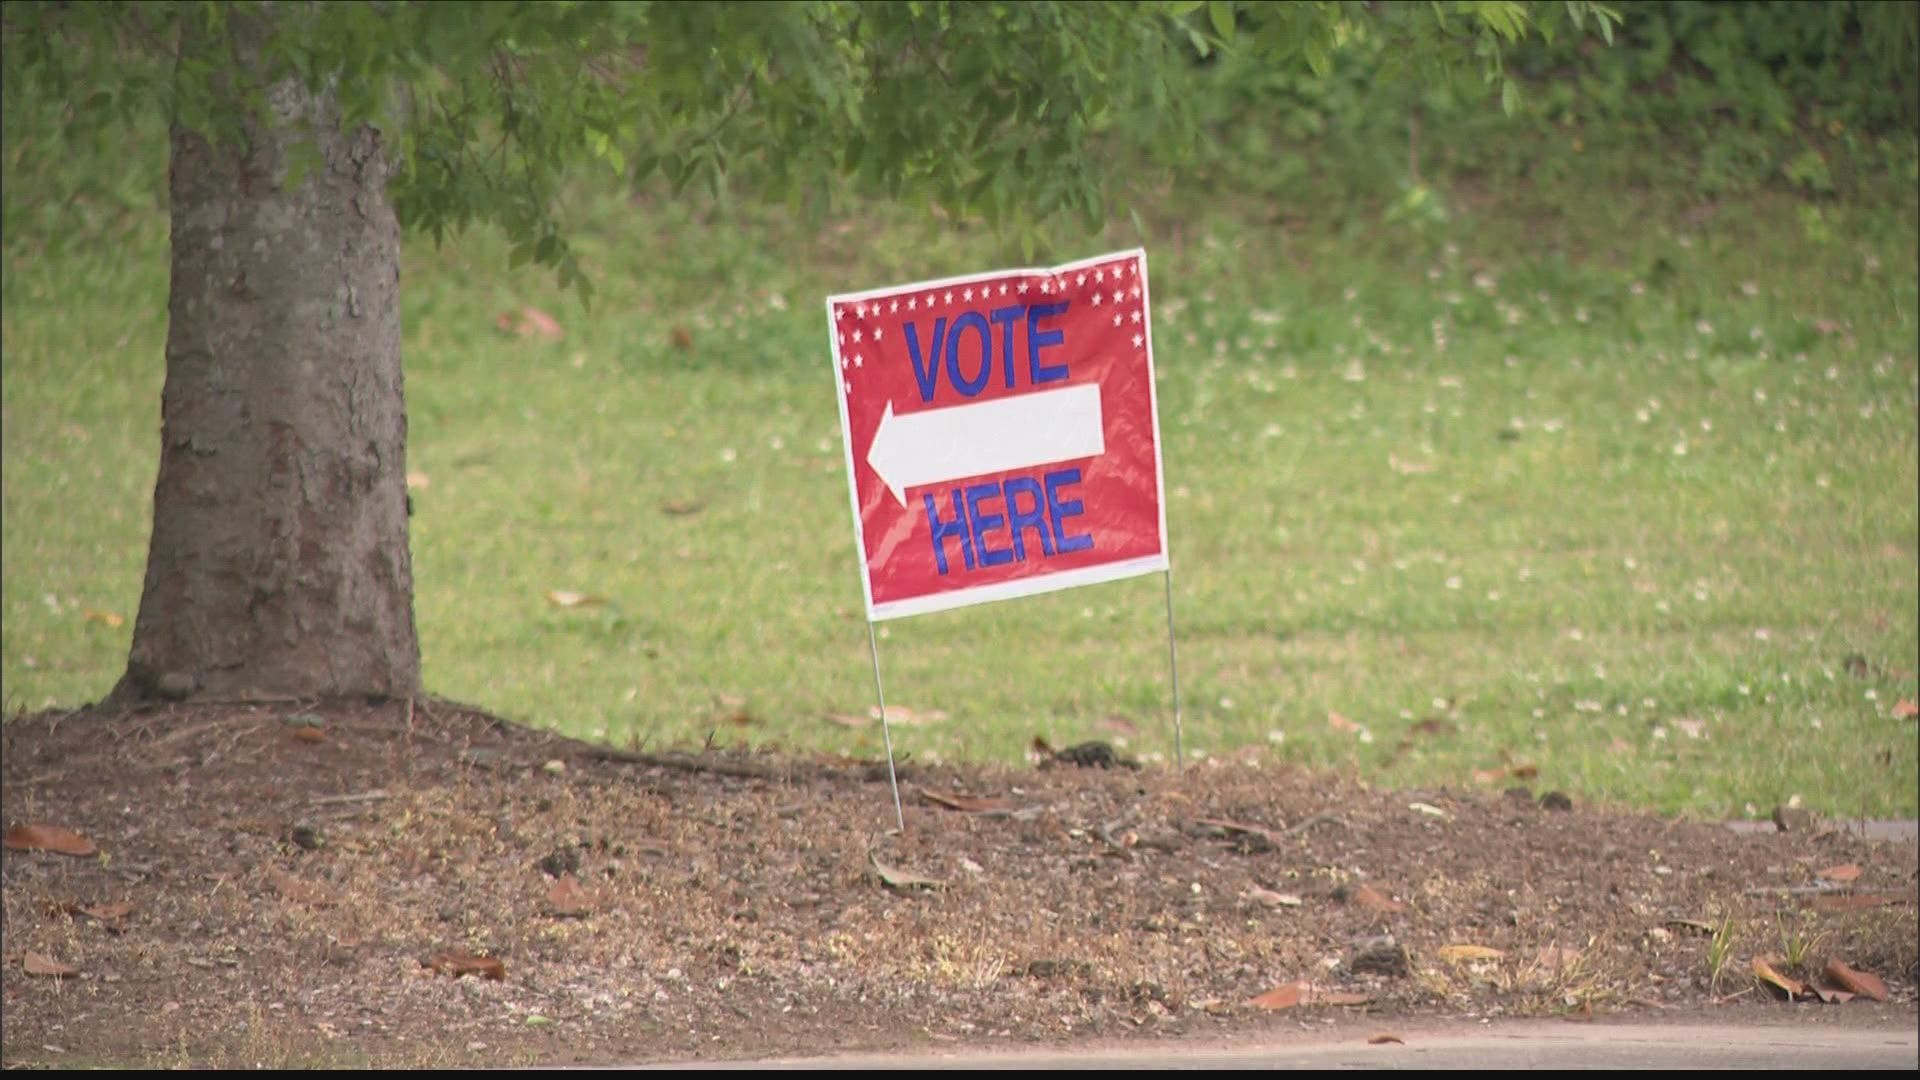 Election workers on-site tell 11Alive the day started off slow. More people began to arrive later in the afternoon.